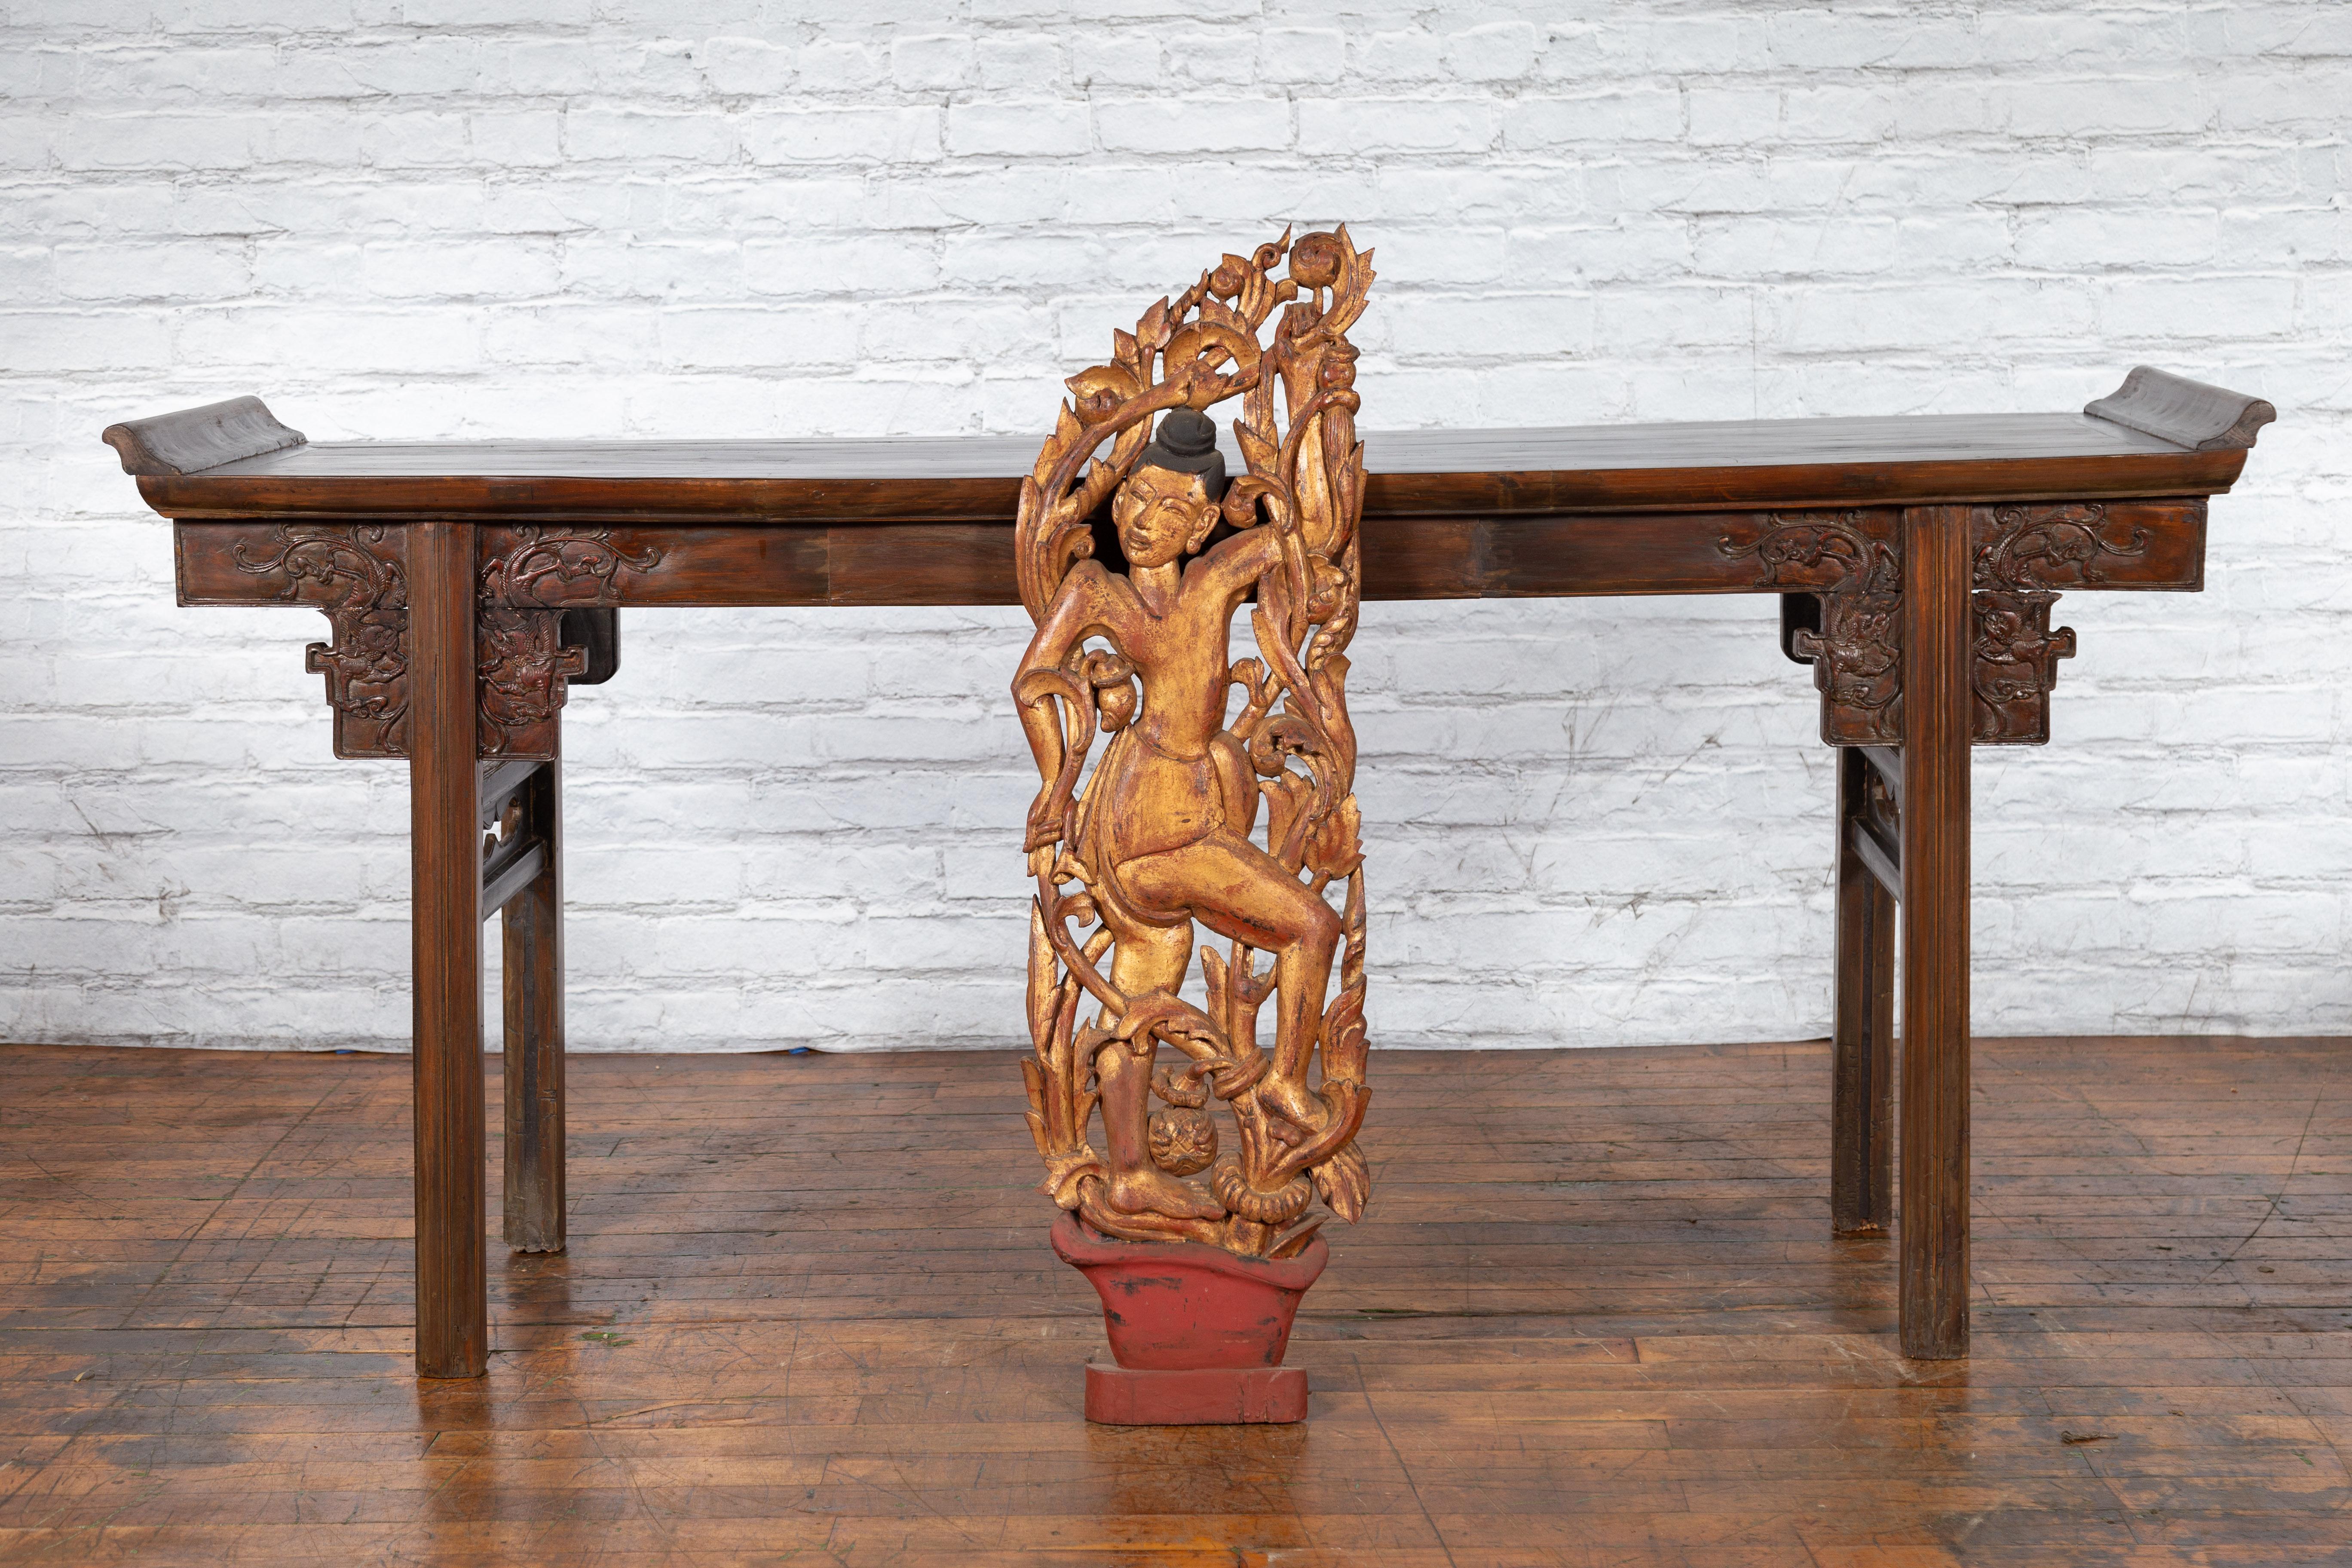 An antique Burmese giltwood sculpture from the 19th century, depicting a dancer with carved foliage. Created in Burma during the 19th century, this giltwood carving attracts our attention with its lively depiction of a dancer surrounded by foliage.